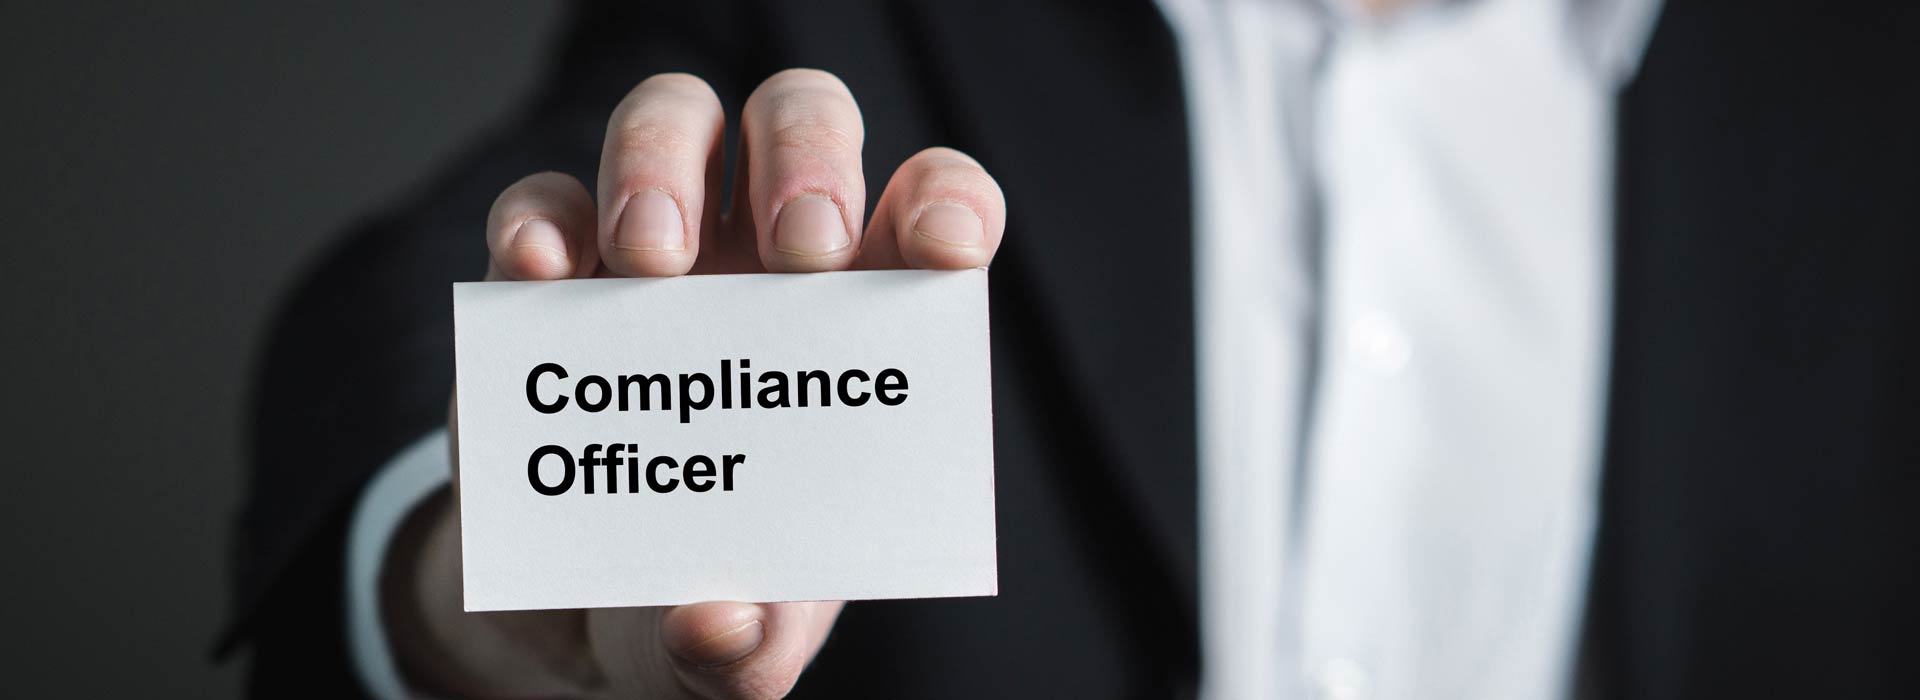 Compliance Officer | Captain Pipes Ltd.